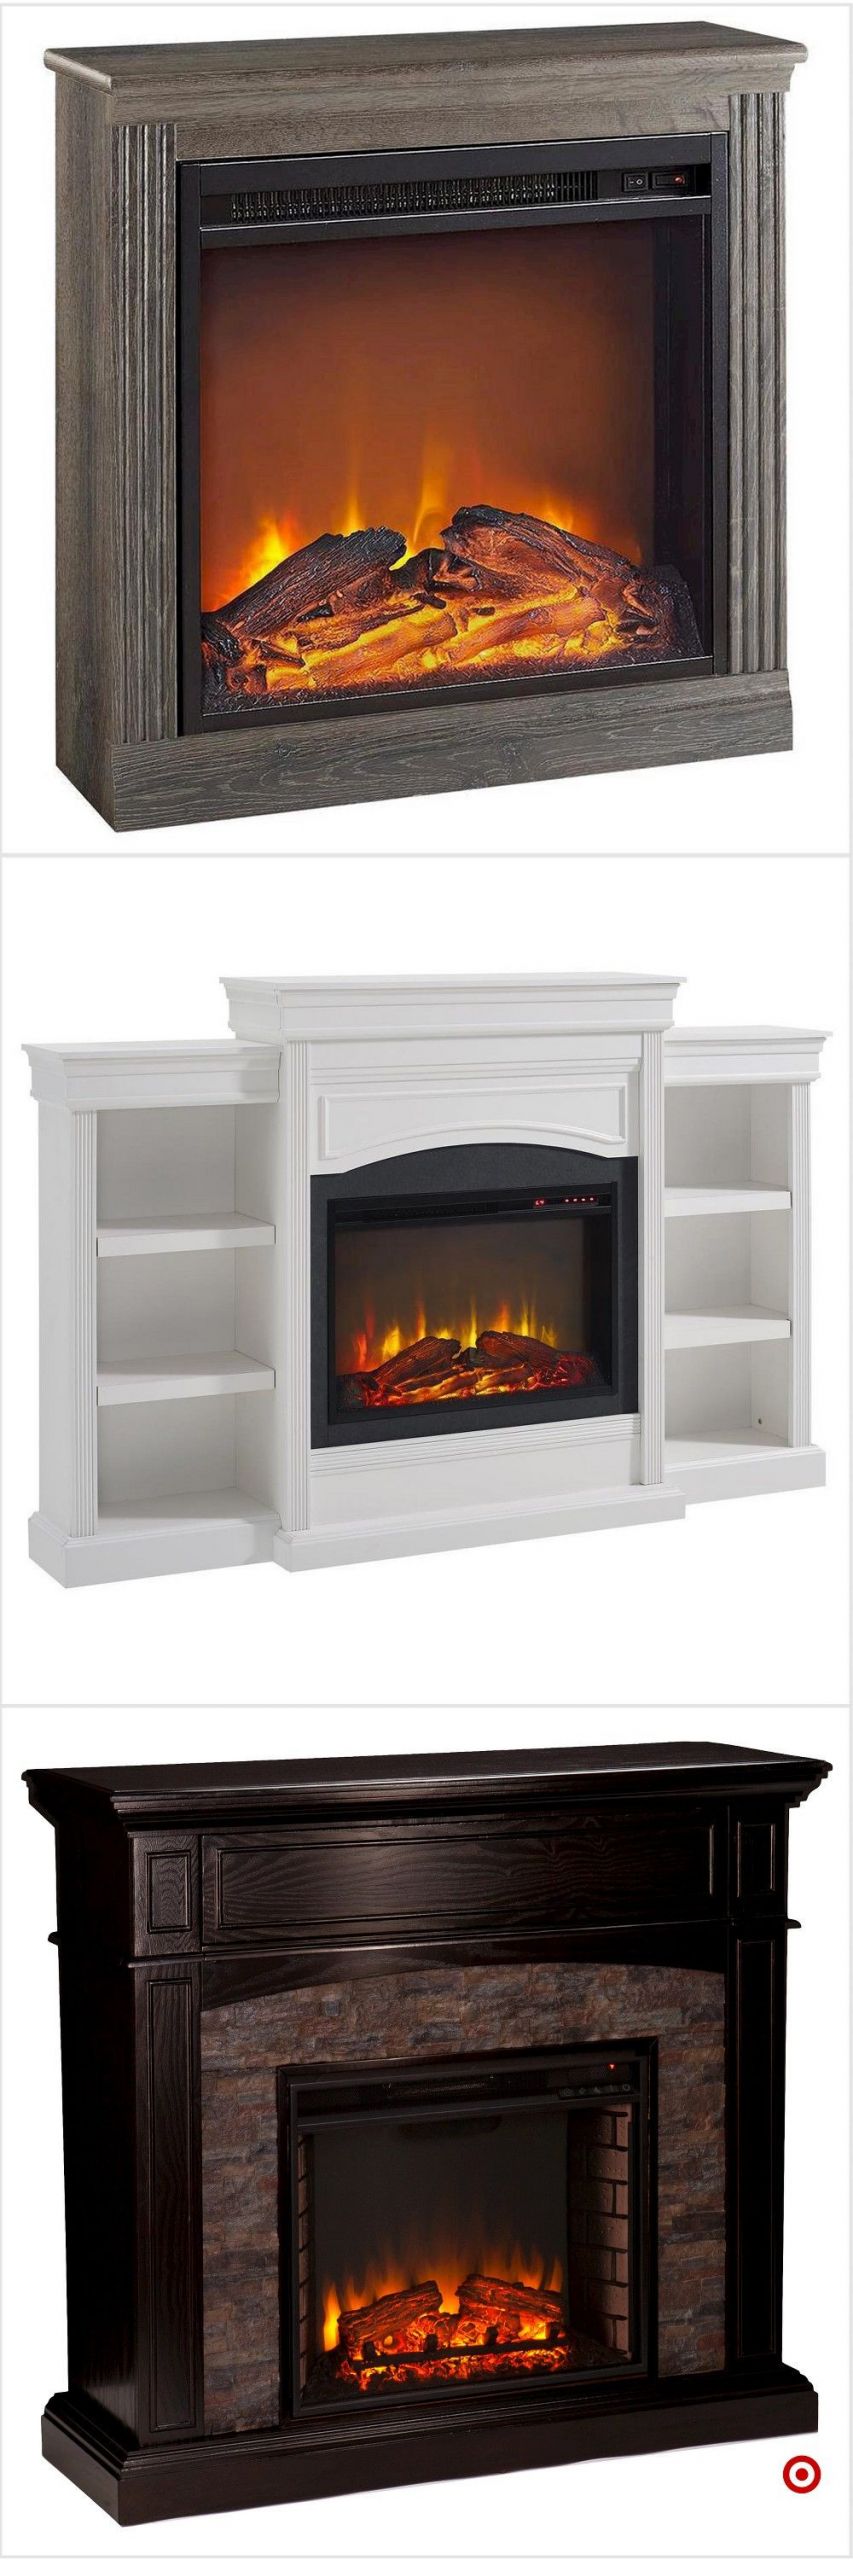 Target Electric Fireplace
 Shop Tar for decorative fireplaces you will love at